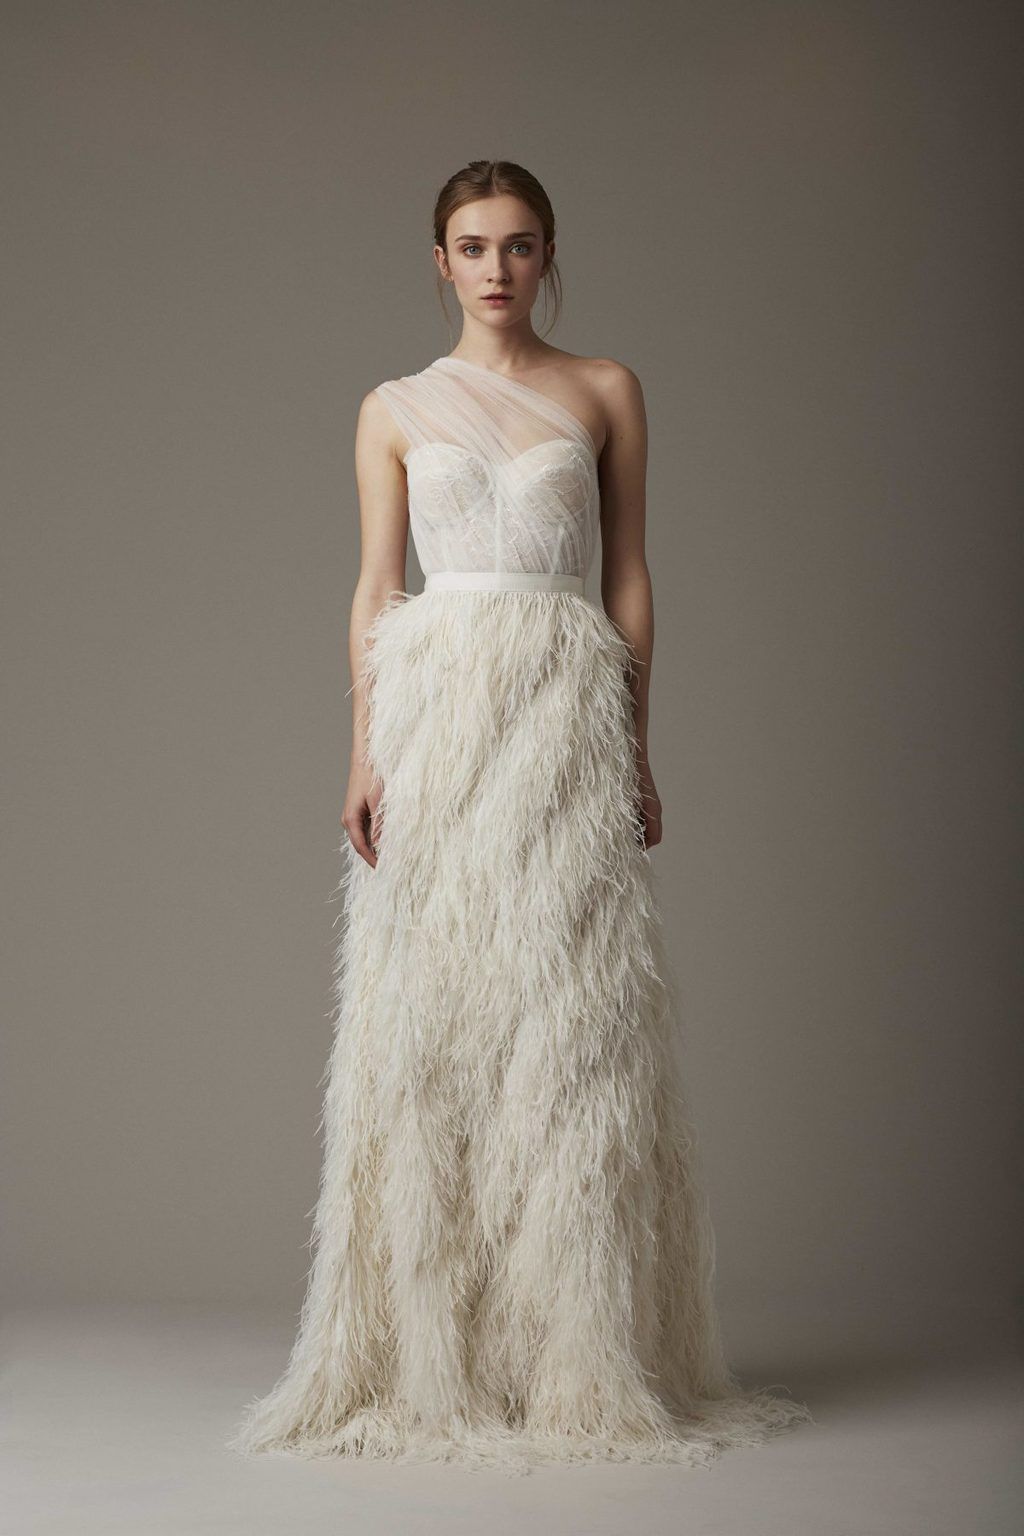 35 Ostrich Feather Wedding Dresses for the Couture Bride ⋆ Ruffled